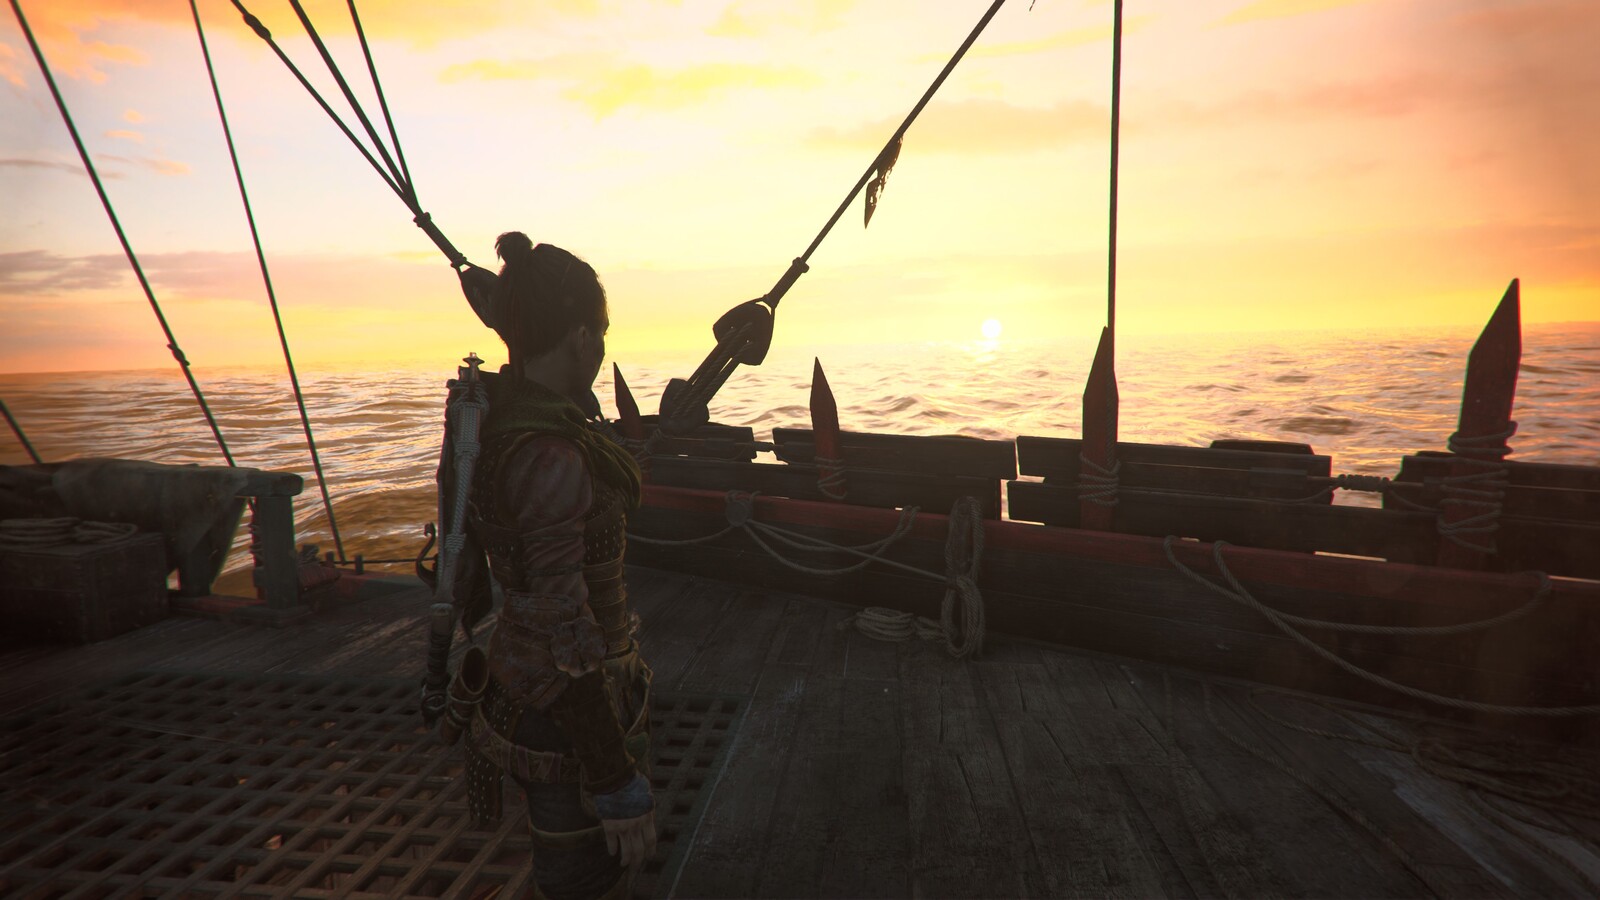 Amicia on a bridge of a ship looking into the sunset